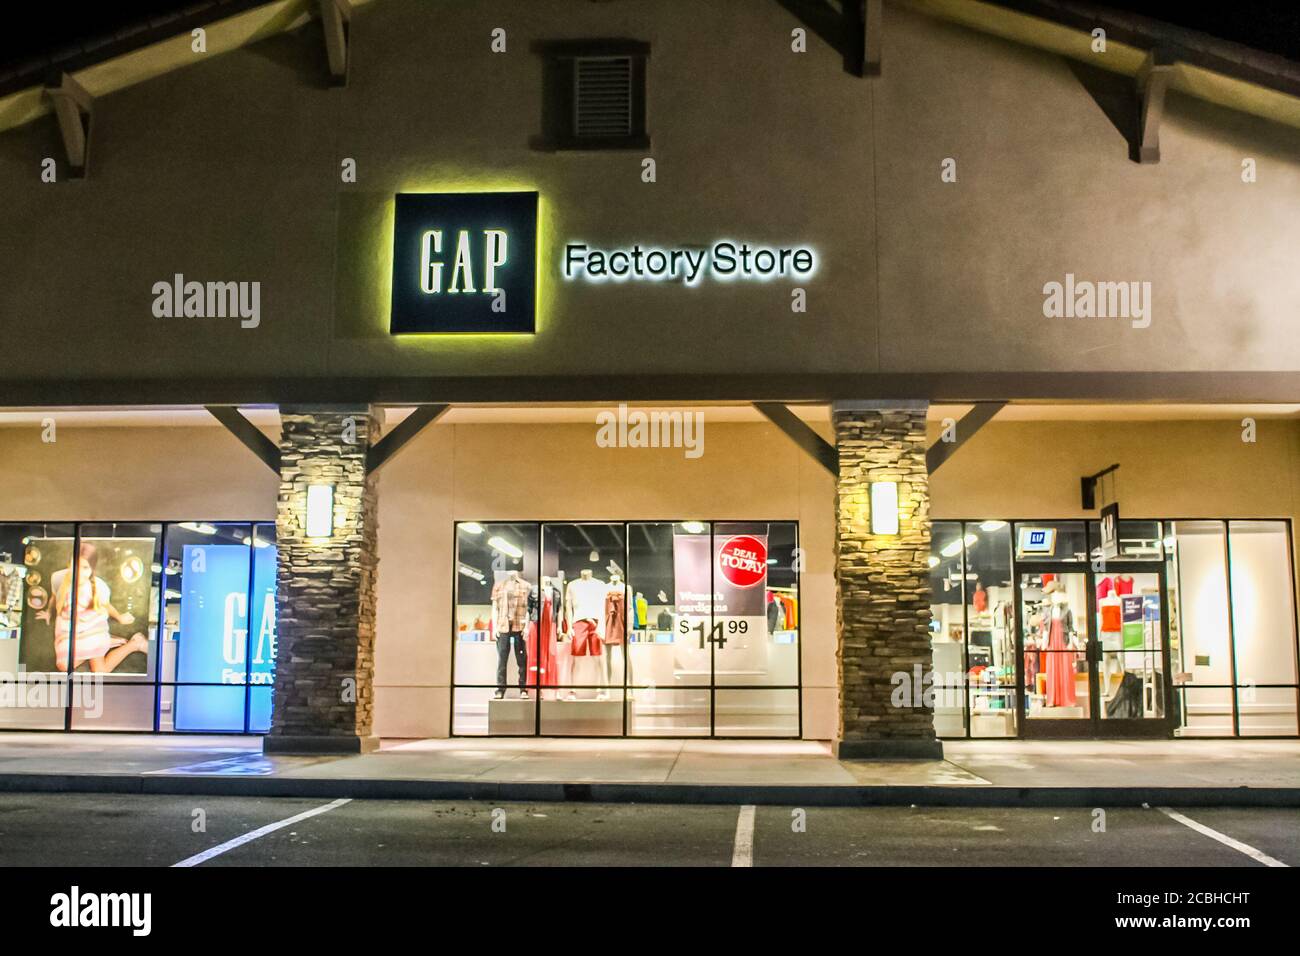 https://c8.alamy.com/comp/2CBHCHT/a-gap-factory-outlet-store-in-camarillo-california-at-the-camarillo-outlets-center-2CBHCHT.jpg